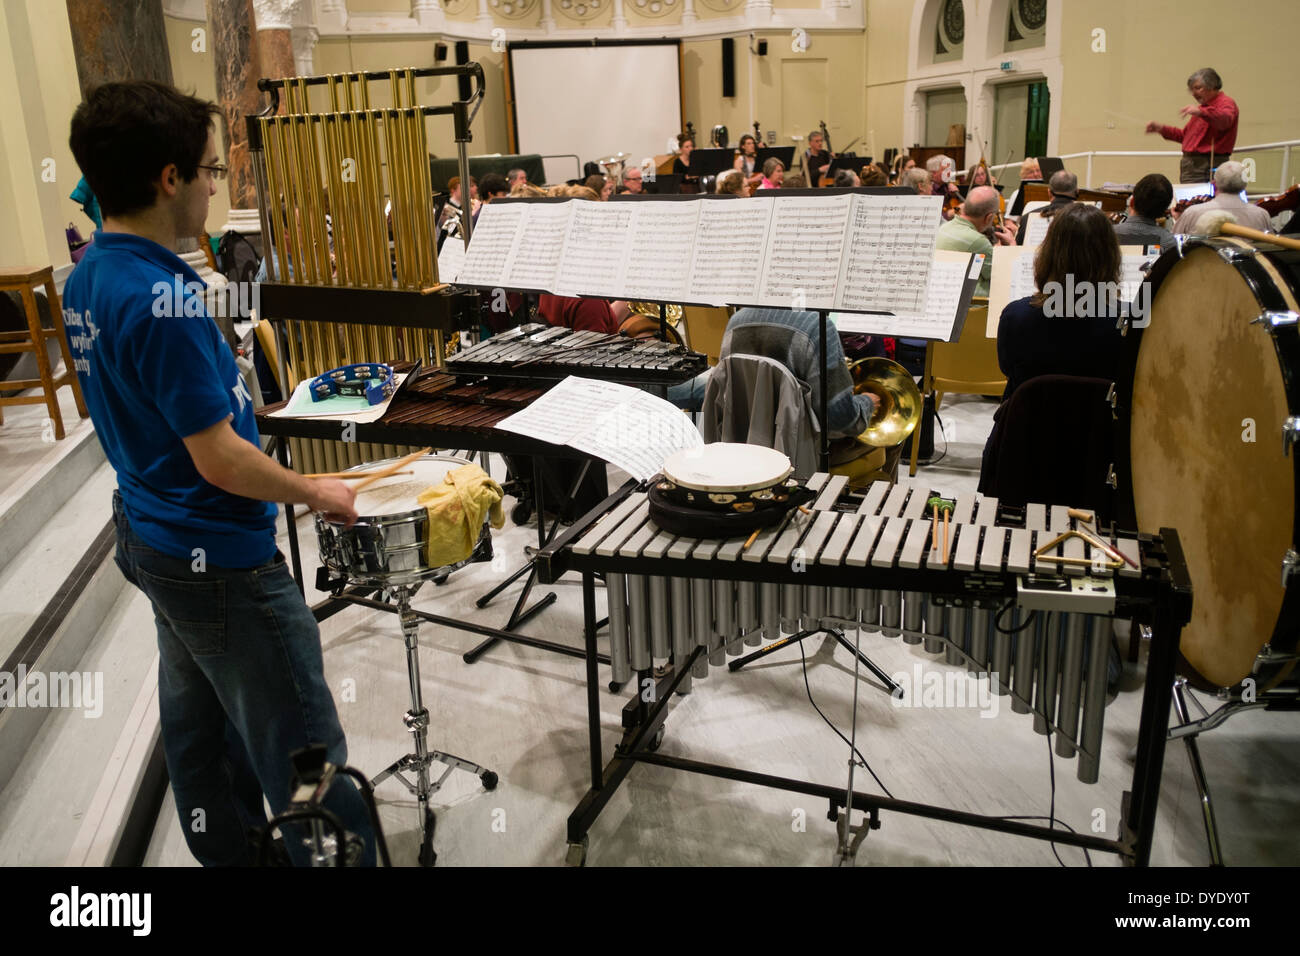 PERCUSSION SECTION Members of an Aberystwyth Philomusica amateur classical music orchestra rehearsing, UK Stock Photo